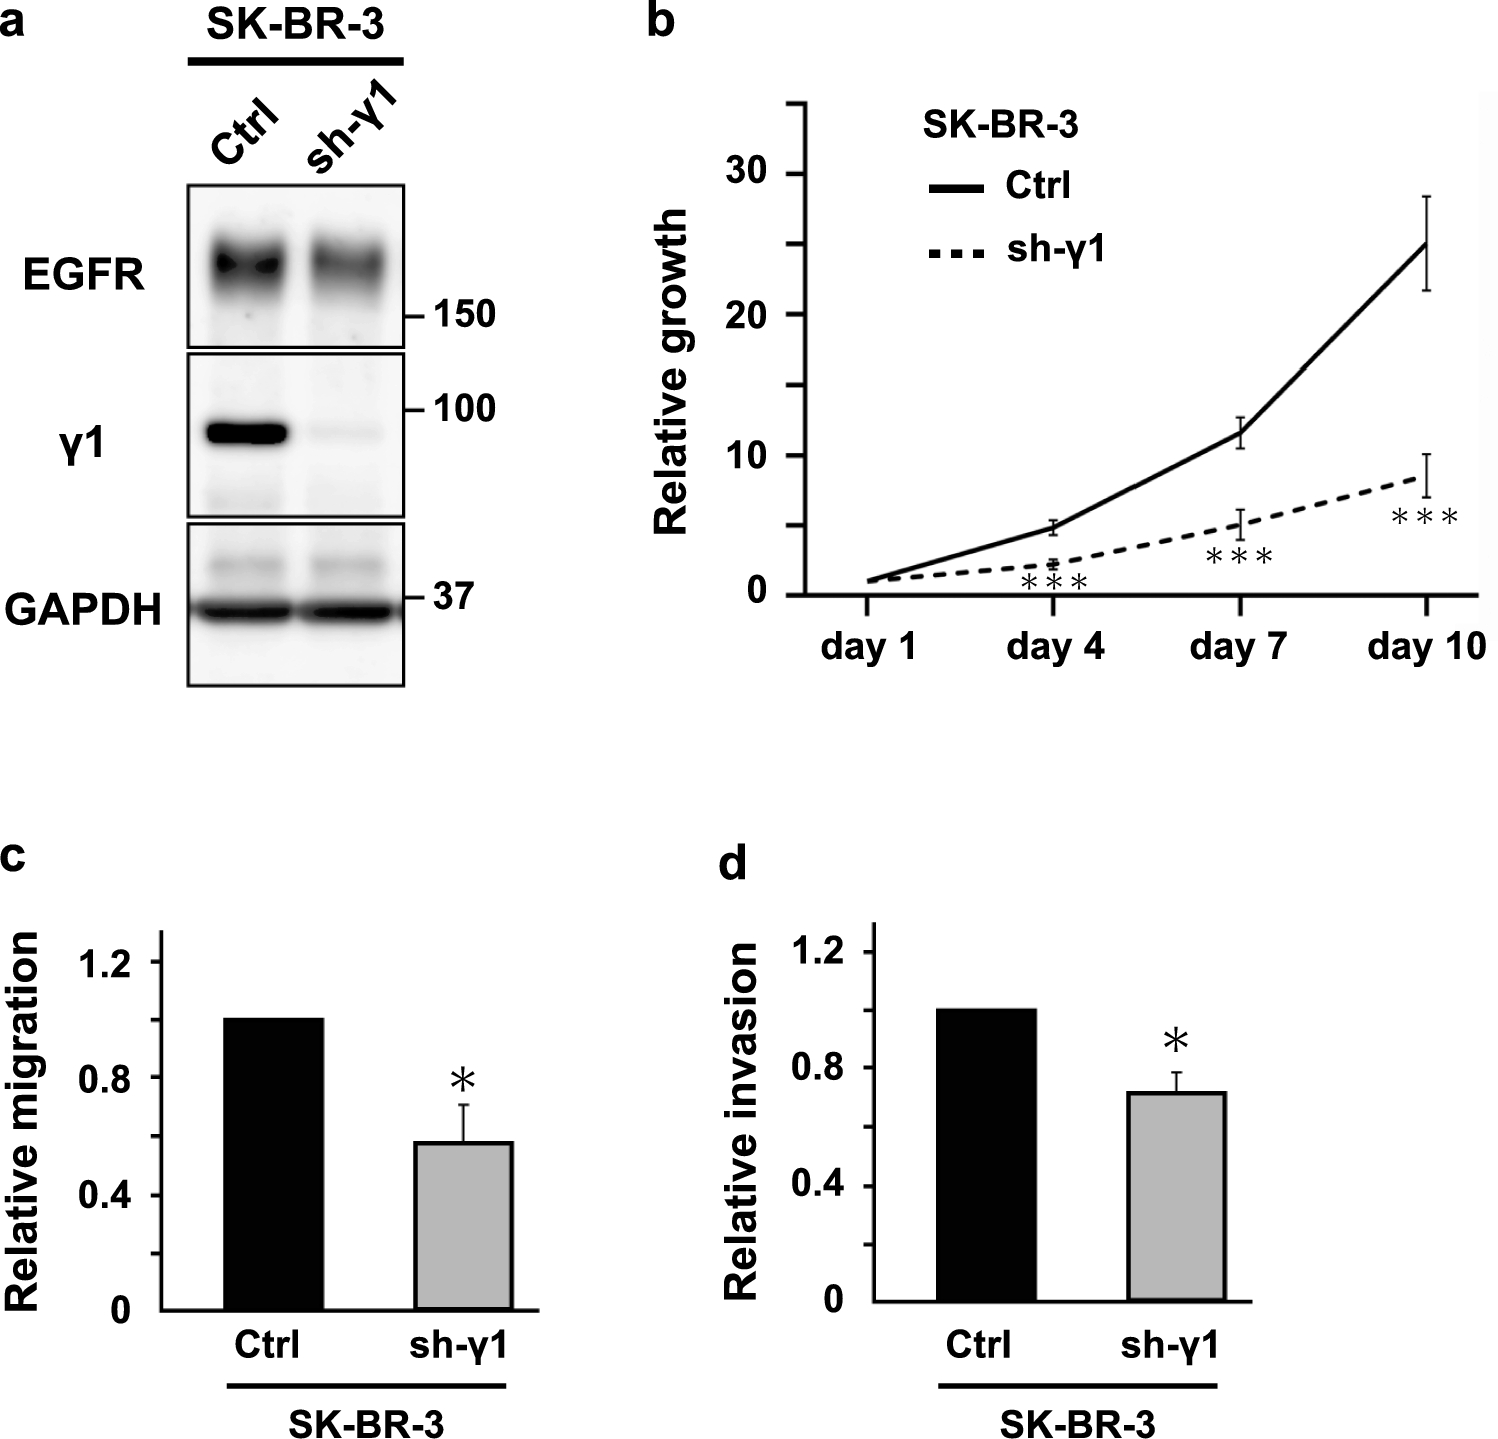 Endosomal protein expression of γ1-adaptin is associated with tumor growth activity and relapse-free survival in breast cancer